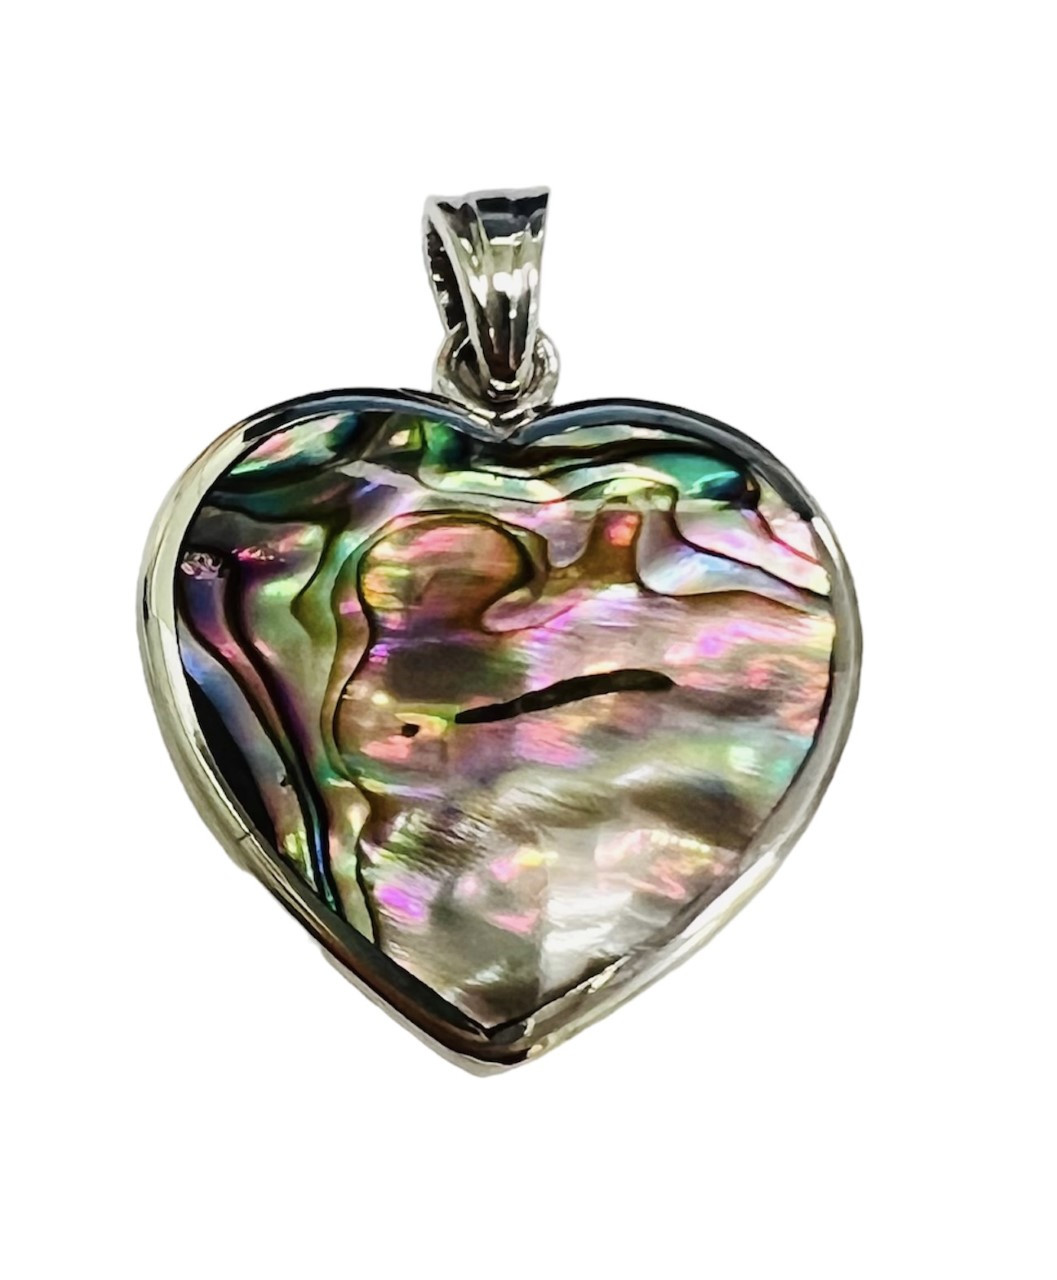 Abalone Heart Necklace Handmade in Sterling Silver 925 With Beautiful Heart  Shape Abalone Shell With the Colors of a Rainbow - Etsy